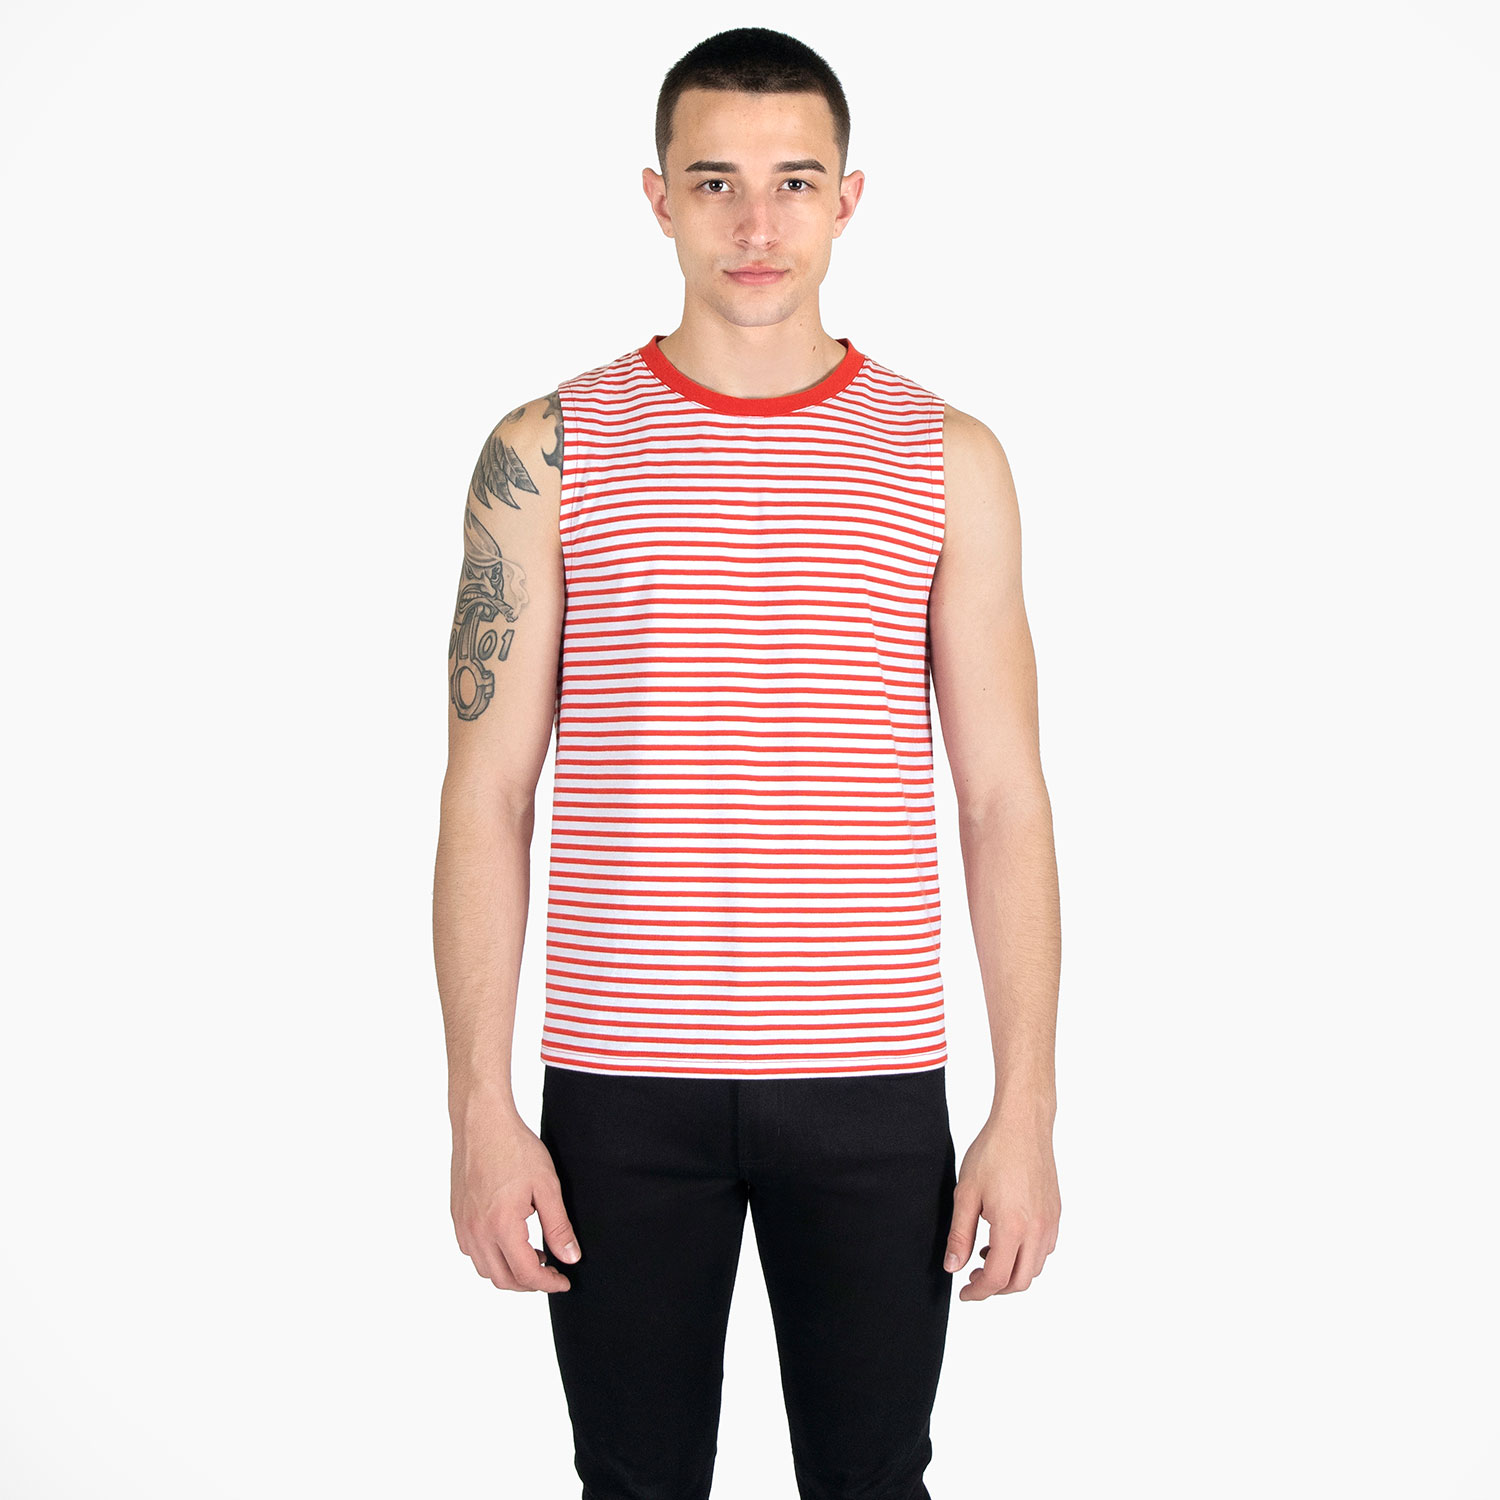 klasse Juster Ulydighed Diego - Red and White Striped Tank Top | Straight To Hell Apparel